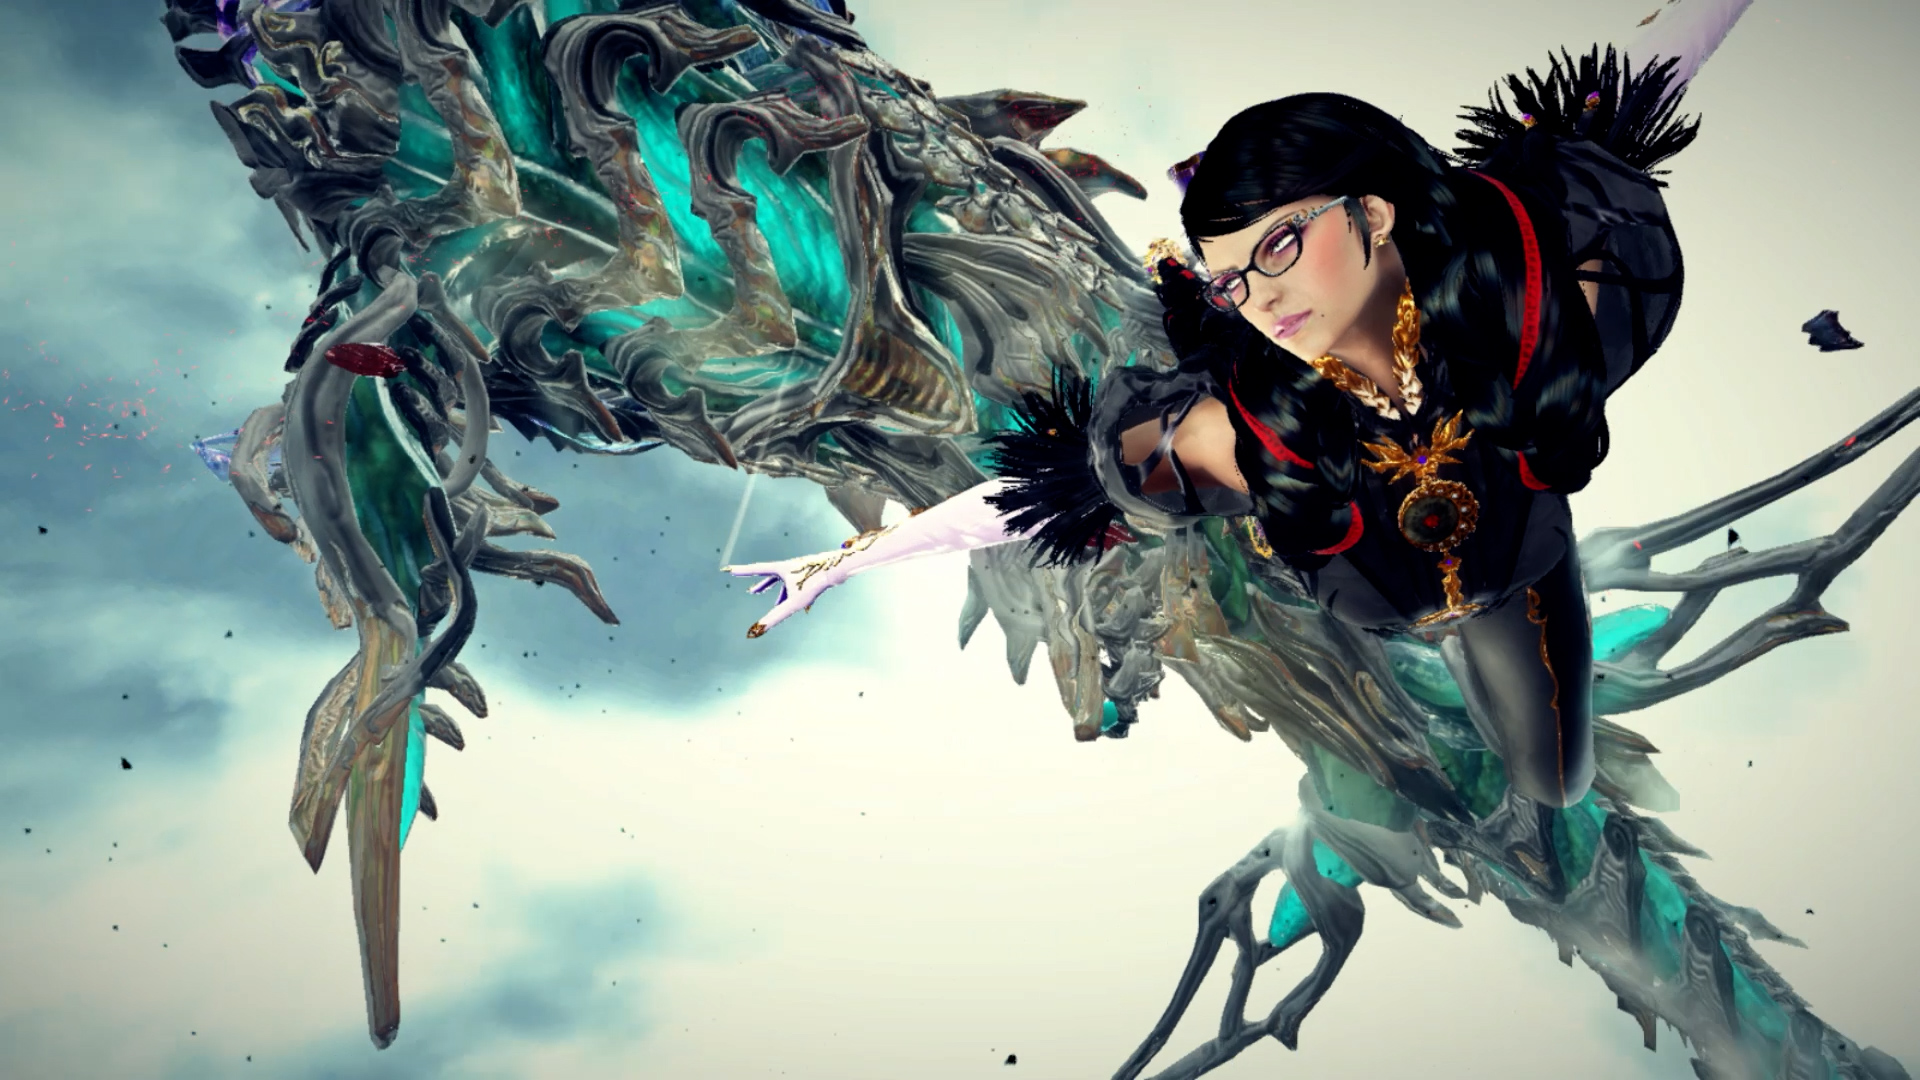 Voice actors reflect on Bayonetta 3 controversy – has anything changed?